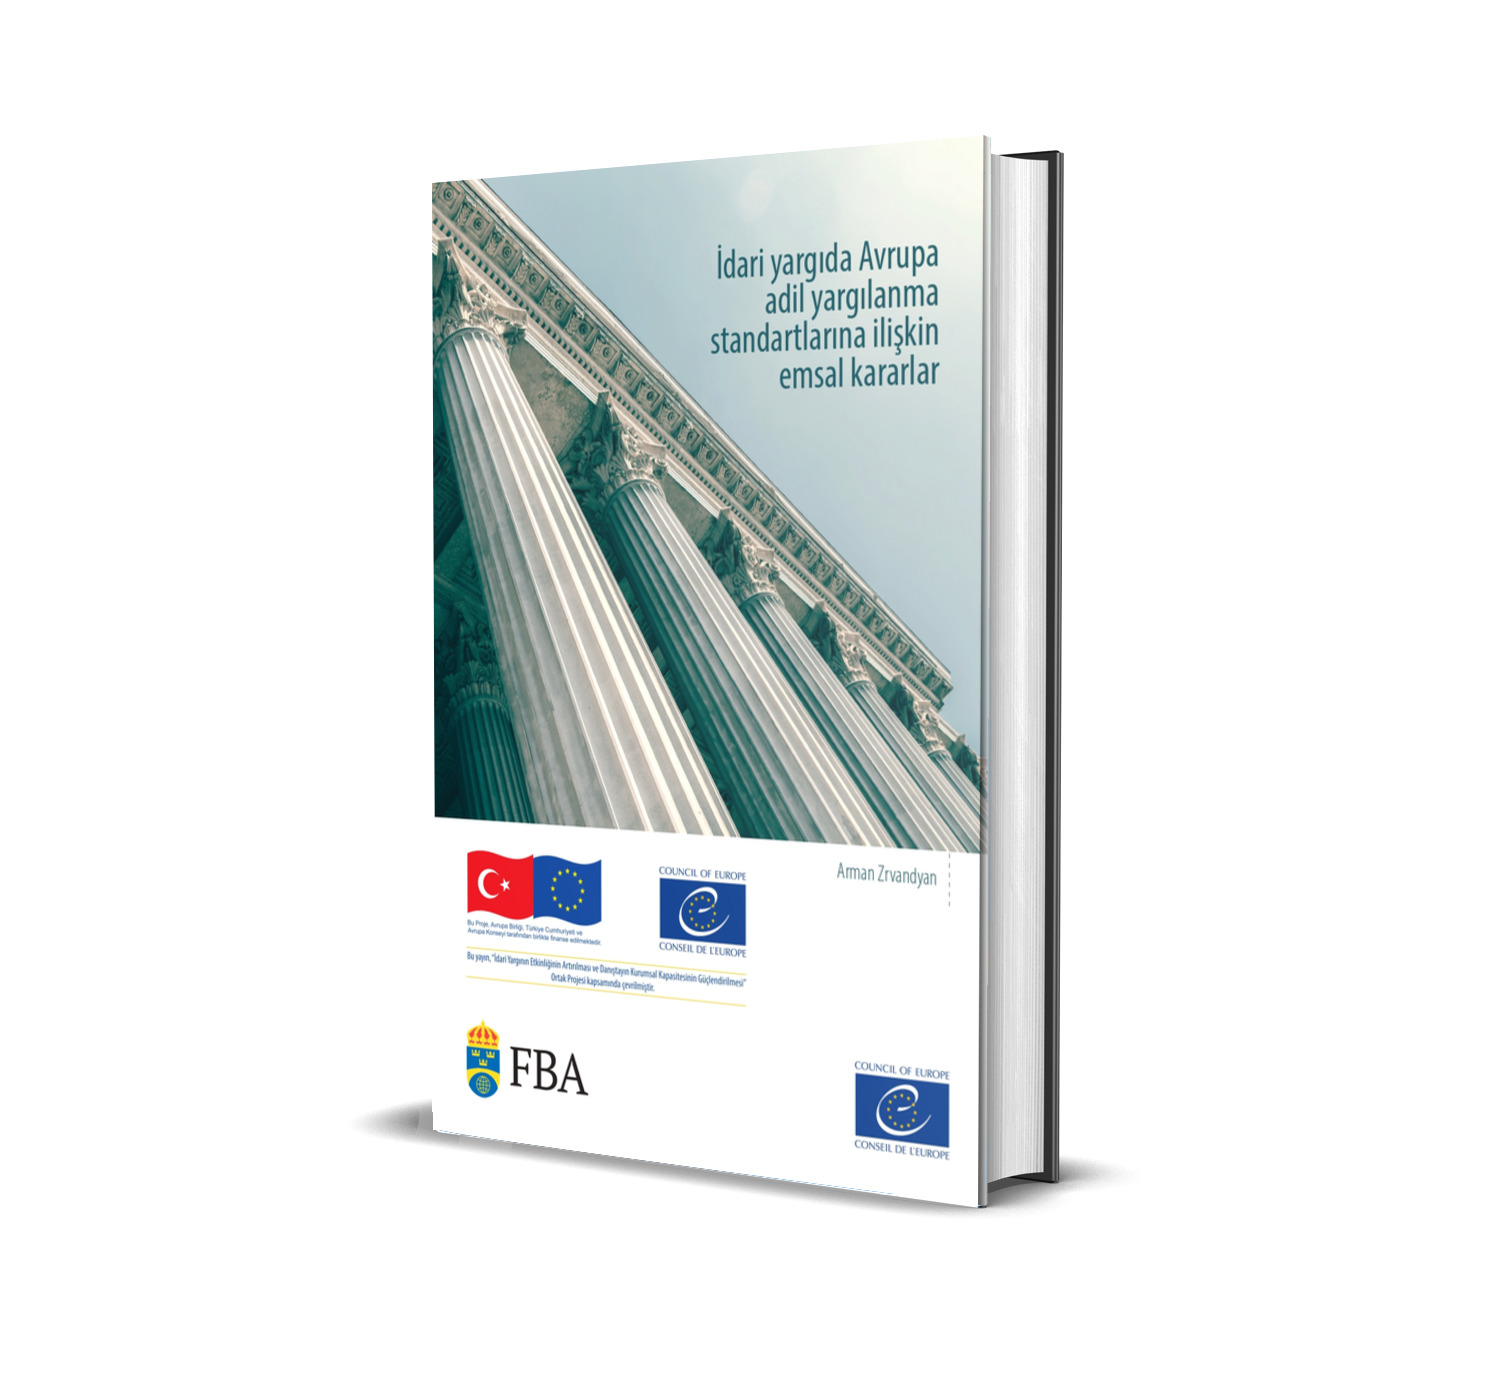 CASEBOOK ON EUROPEAN FAIR TRIAL STANDARDS IN ADMINISTRATIVE JUSTICE HAS BEEN PUBLISHED IN TURKISH